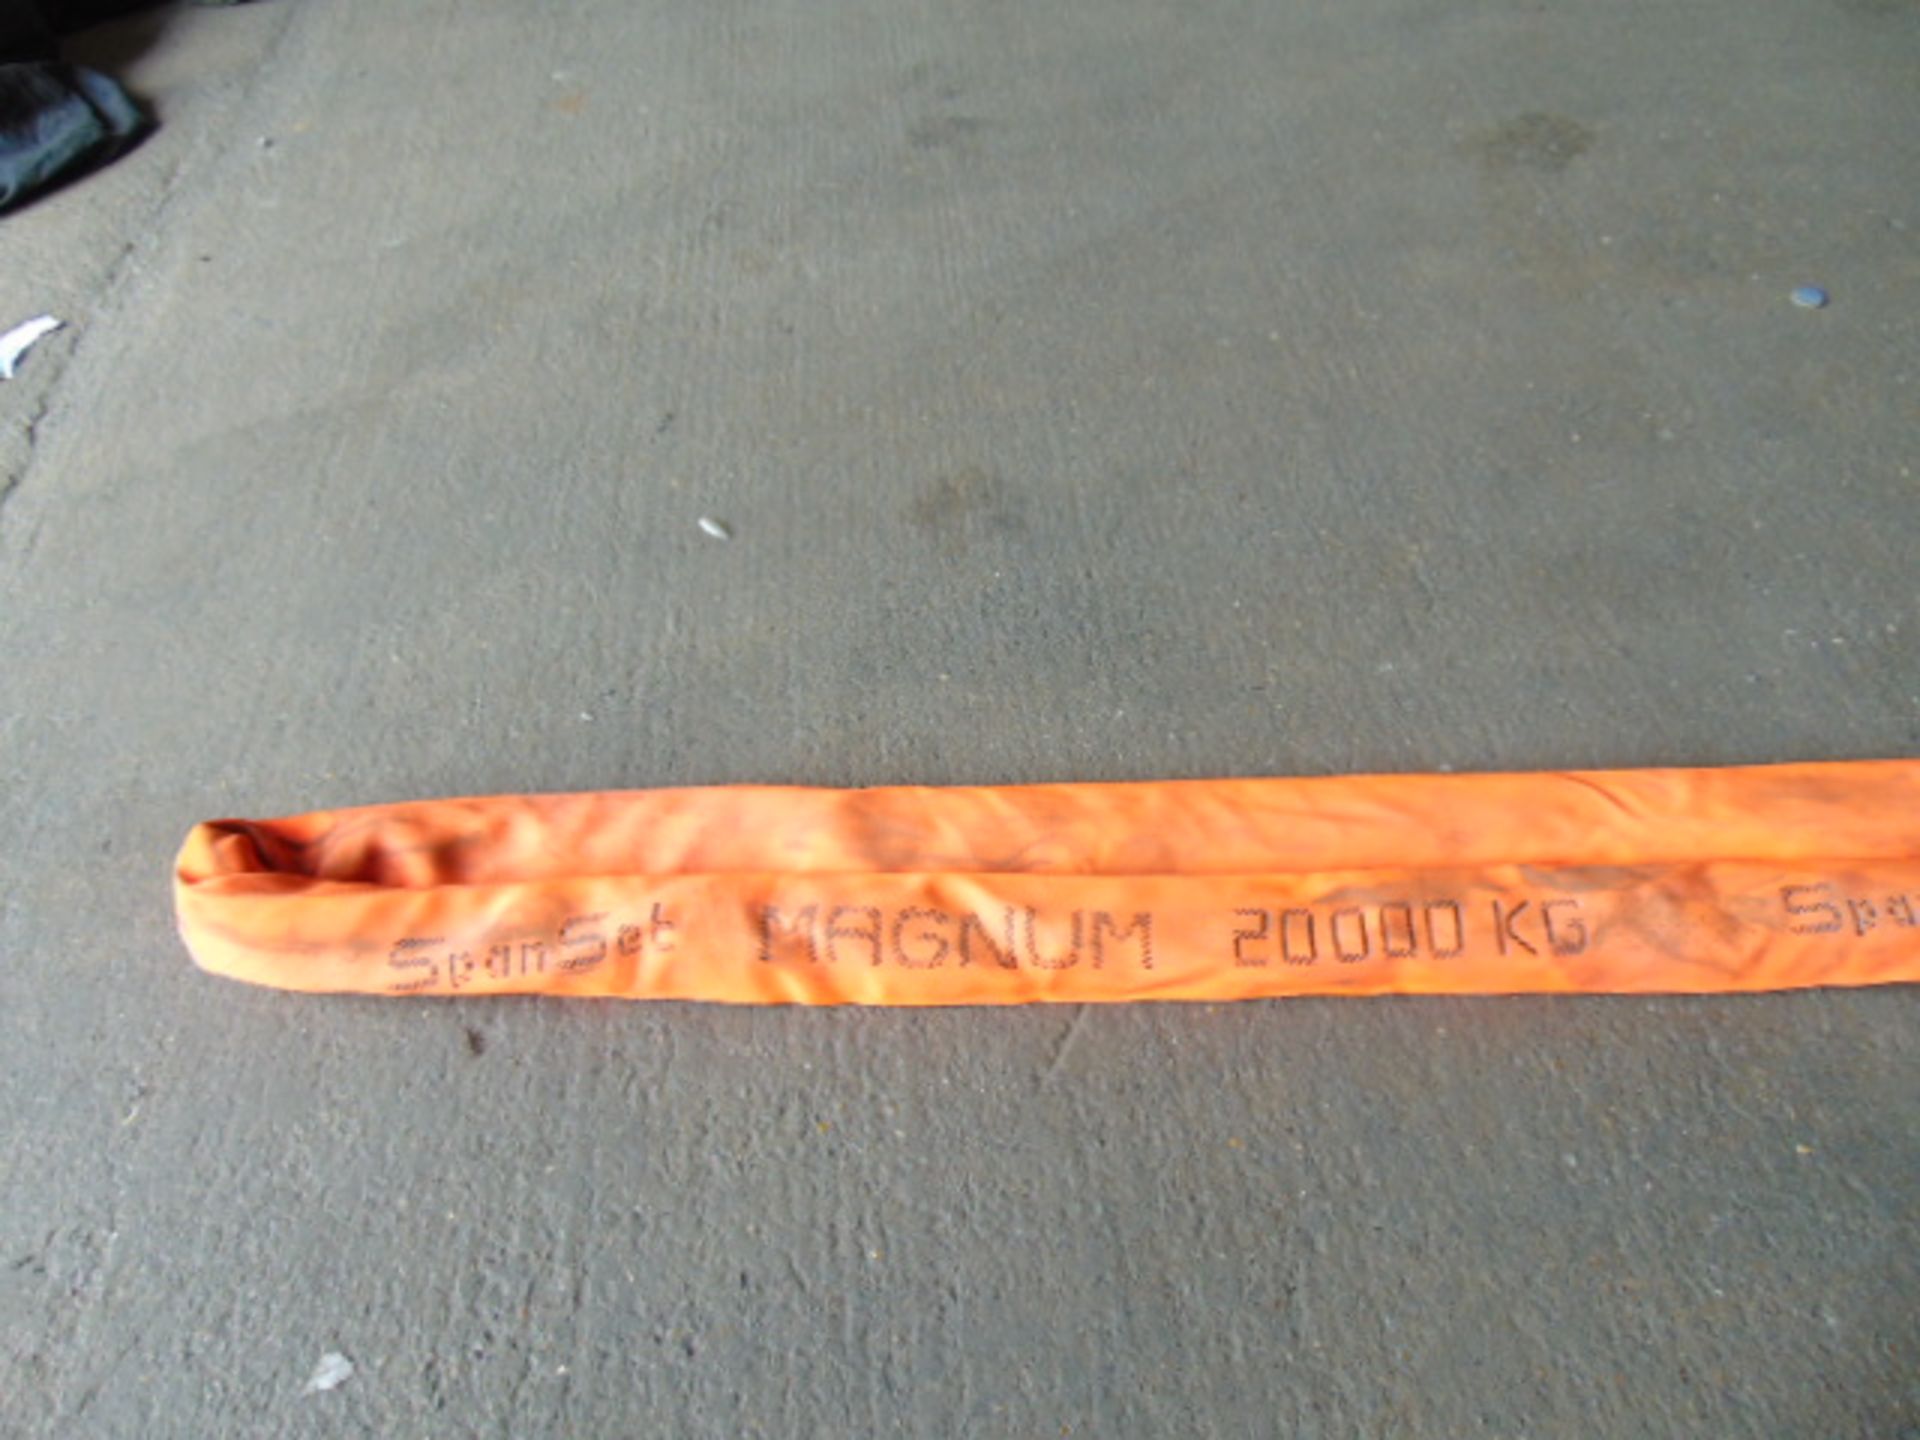 New Unused SpanSet Magnum 20,000kg Lifting/Recovery Strop from MOD - Image 2 of 6